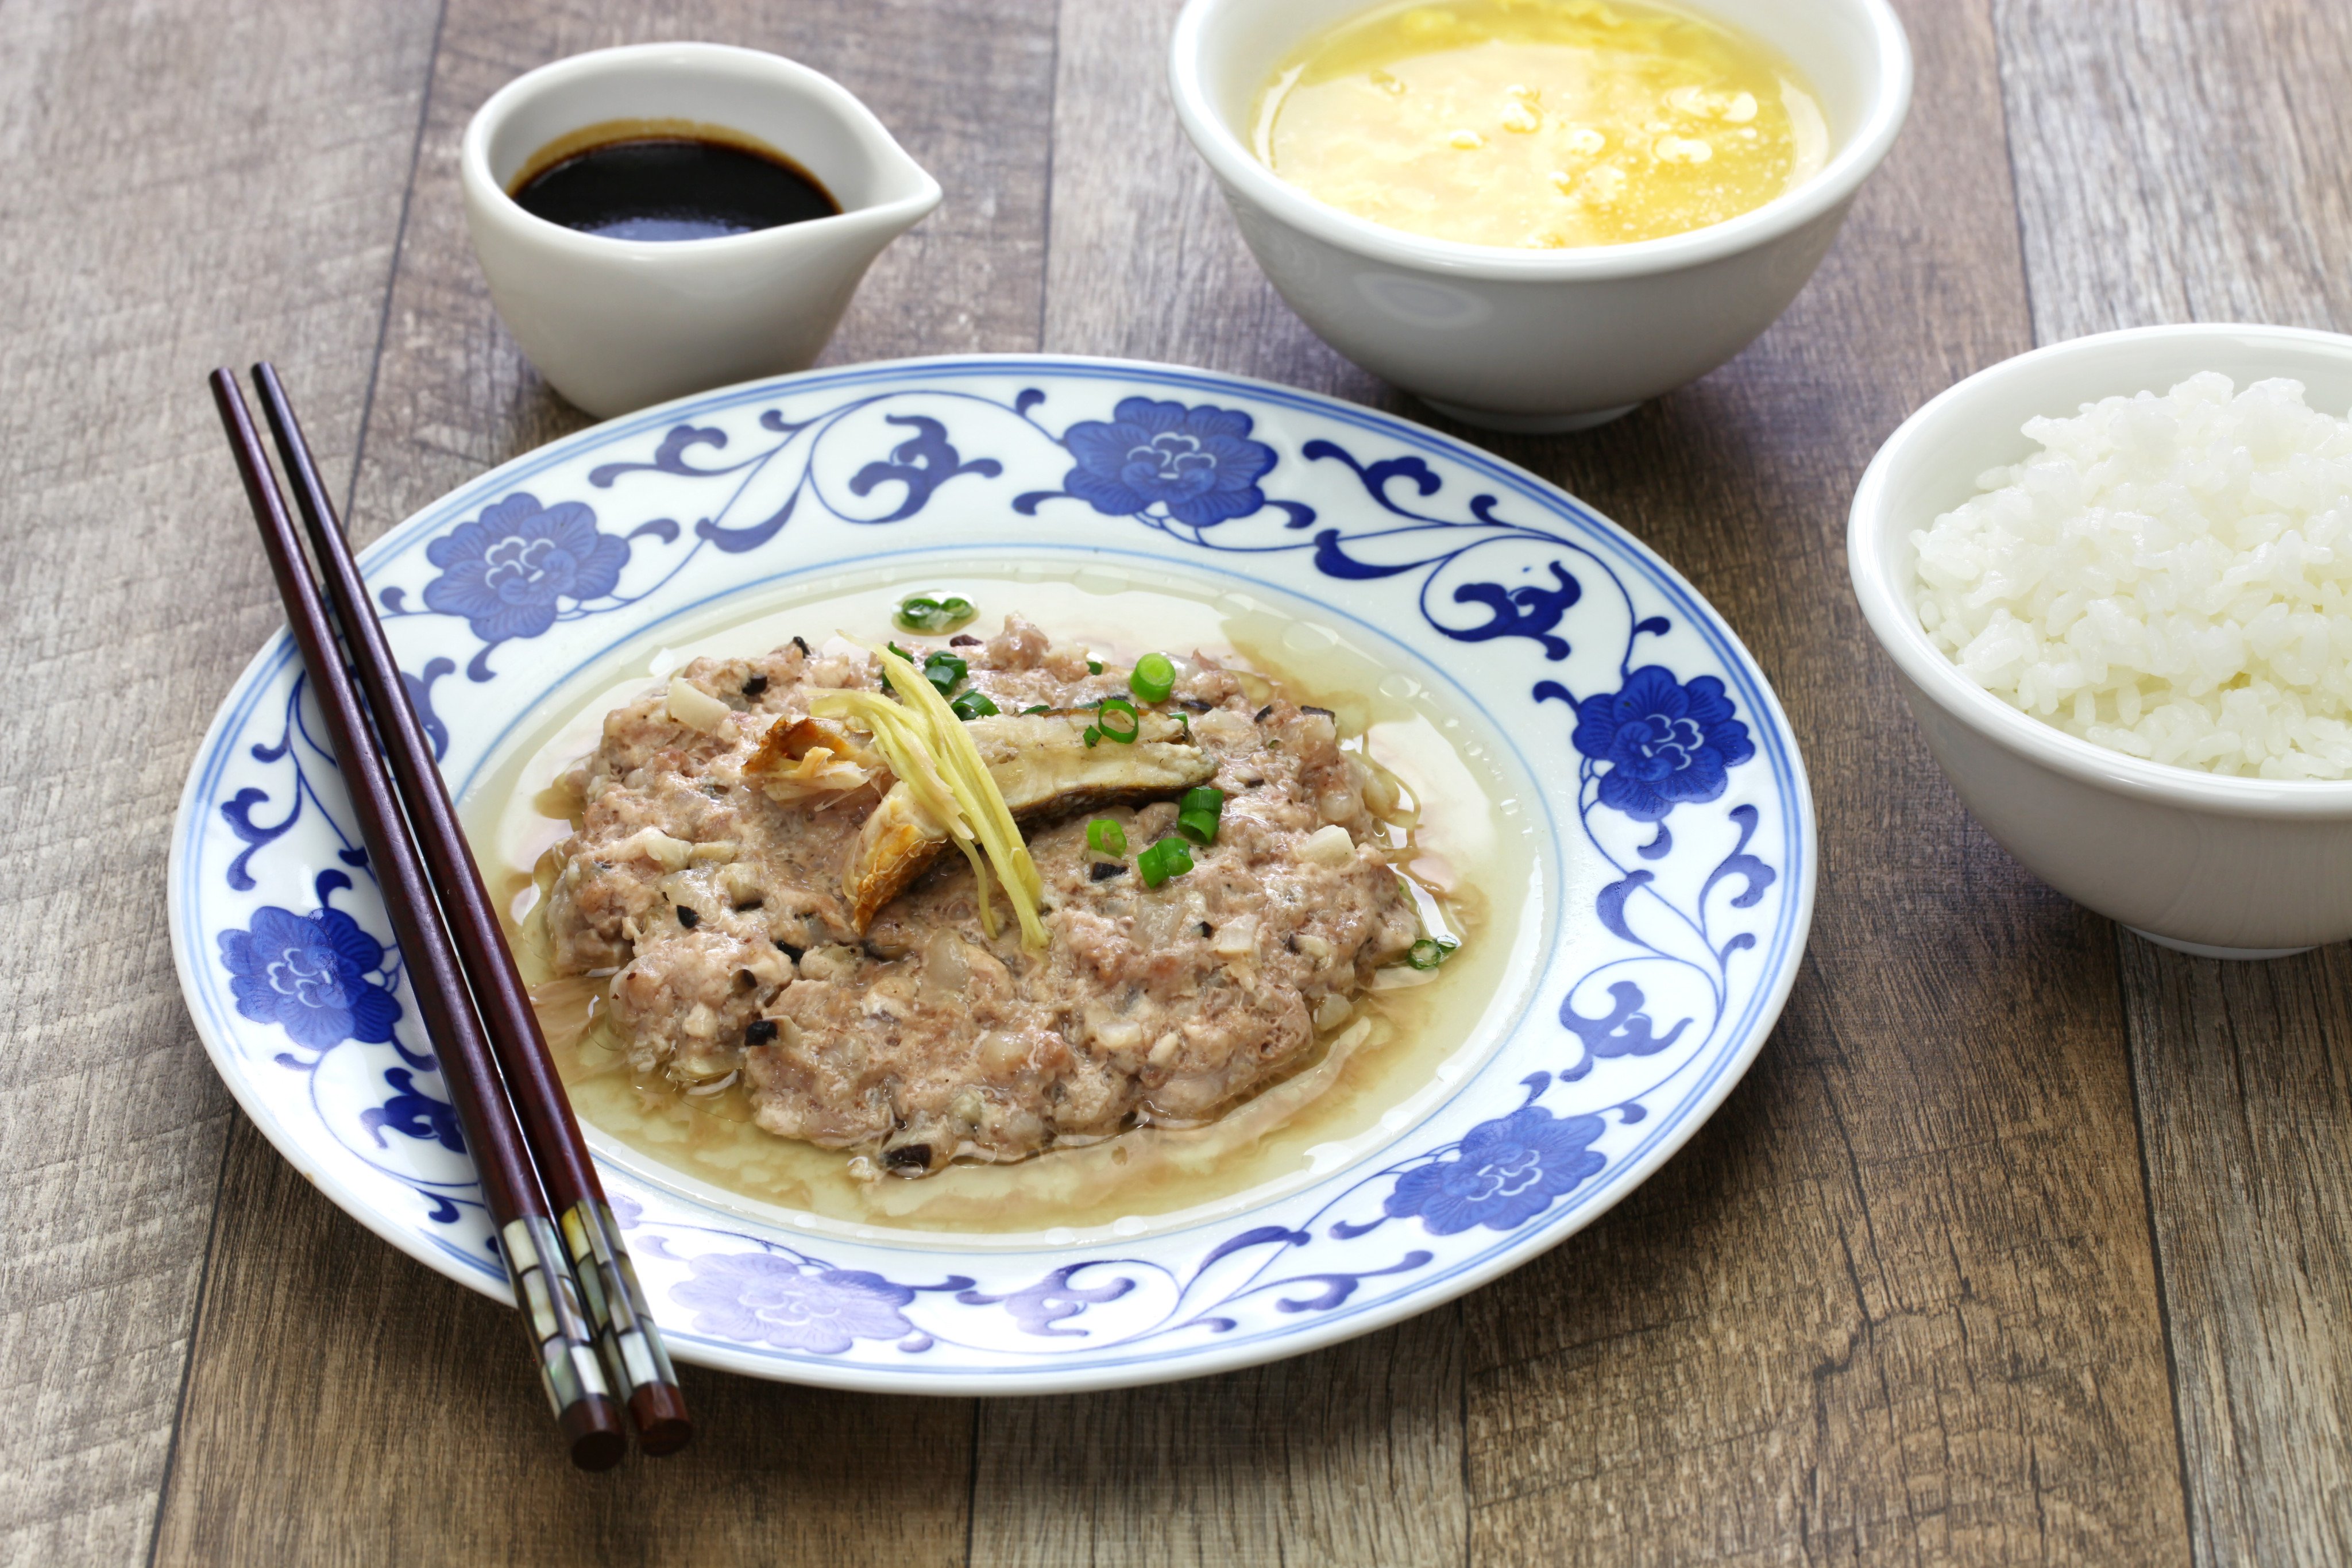 Steamed pork patties are a staple in Cantonese cuisine. Photo: Shutterstock